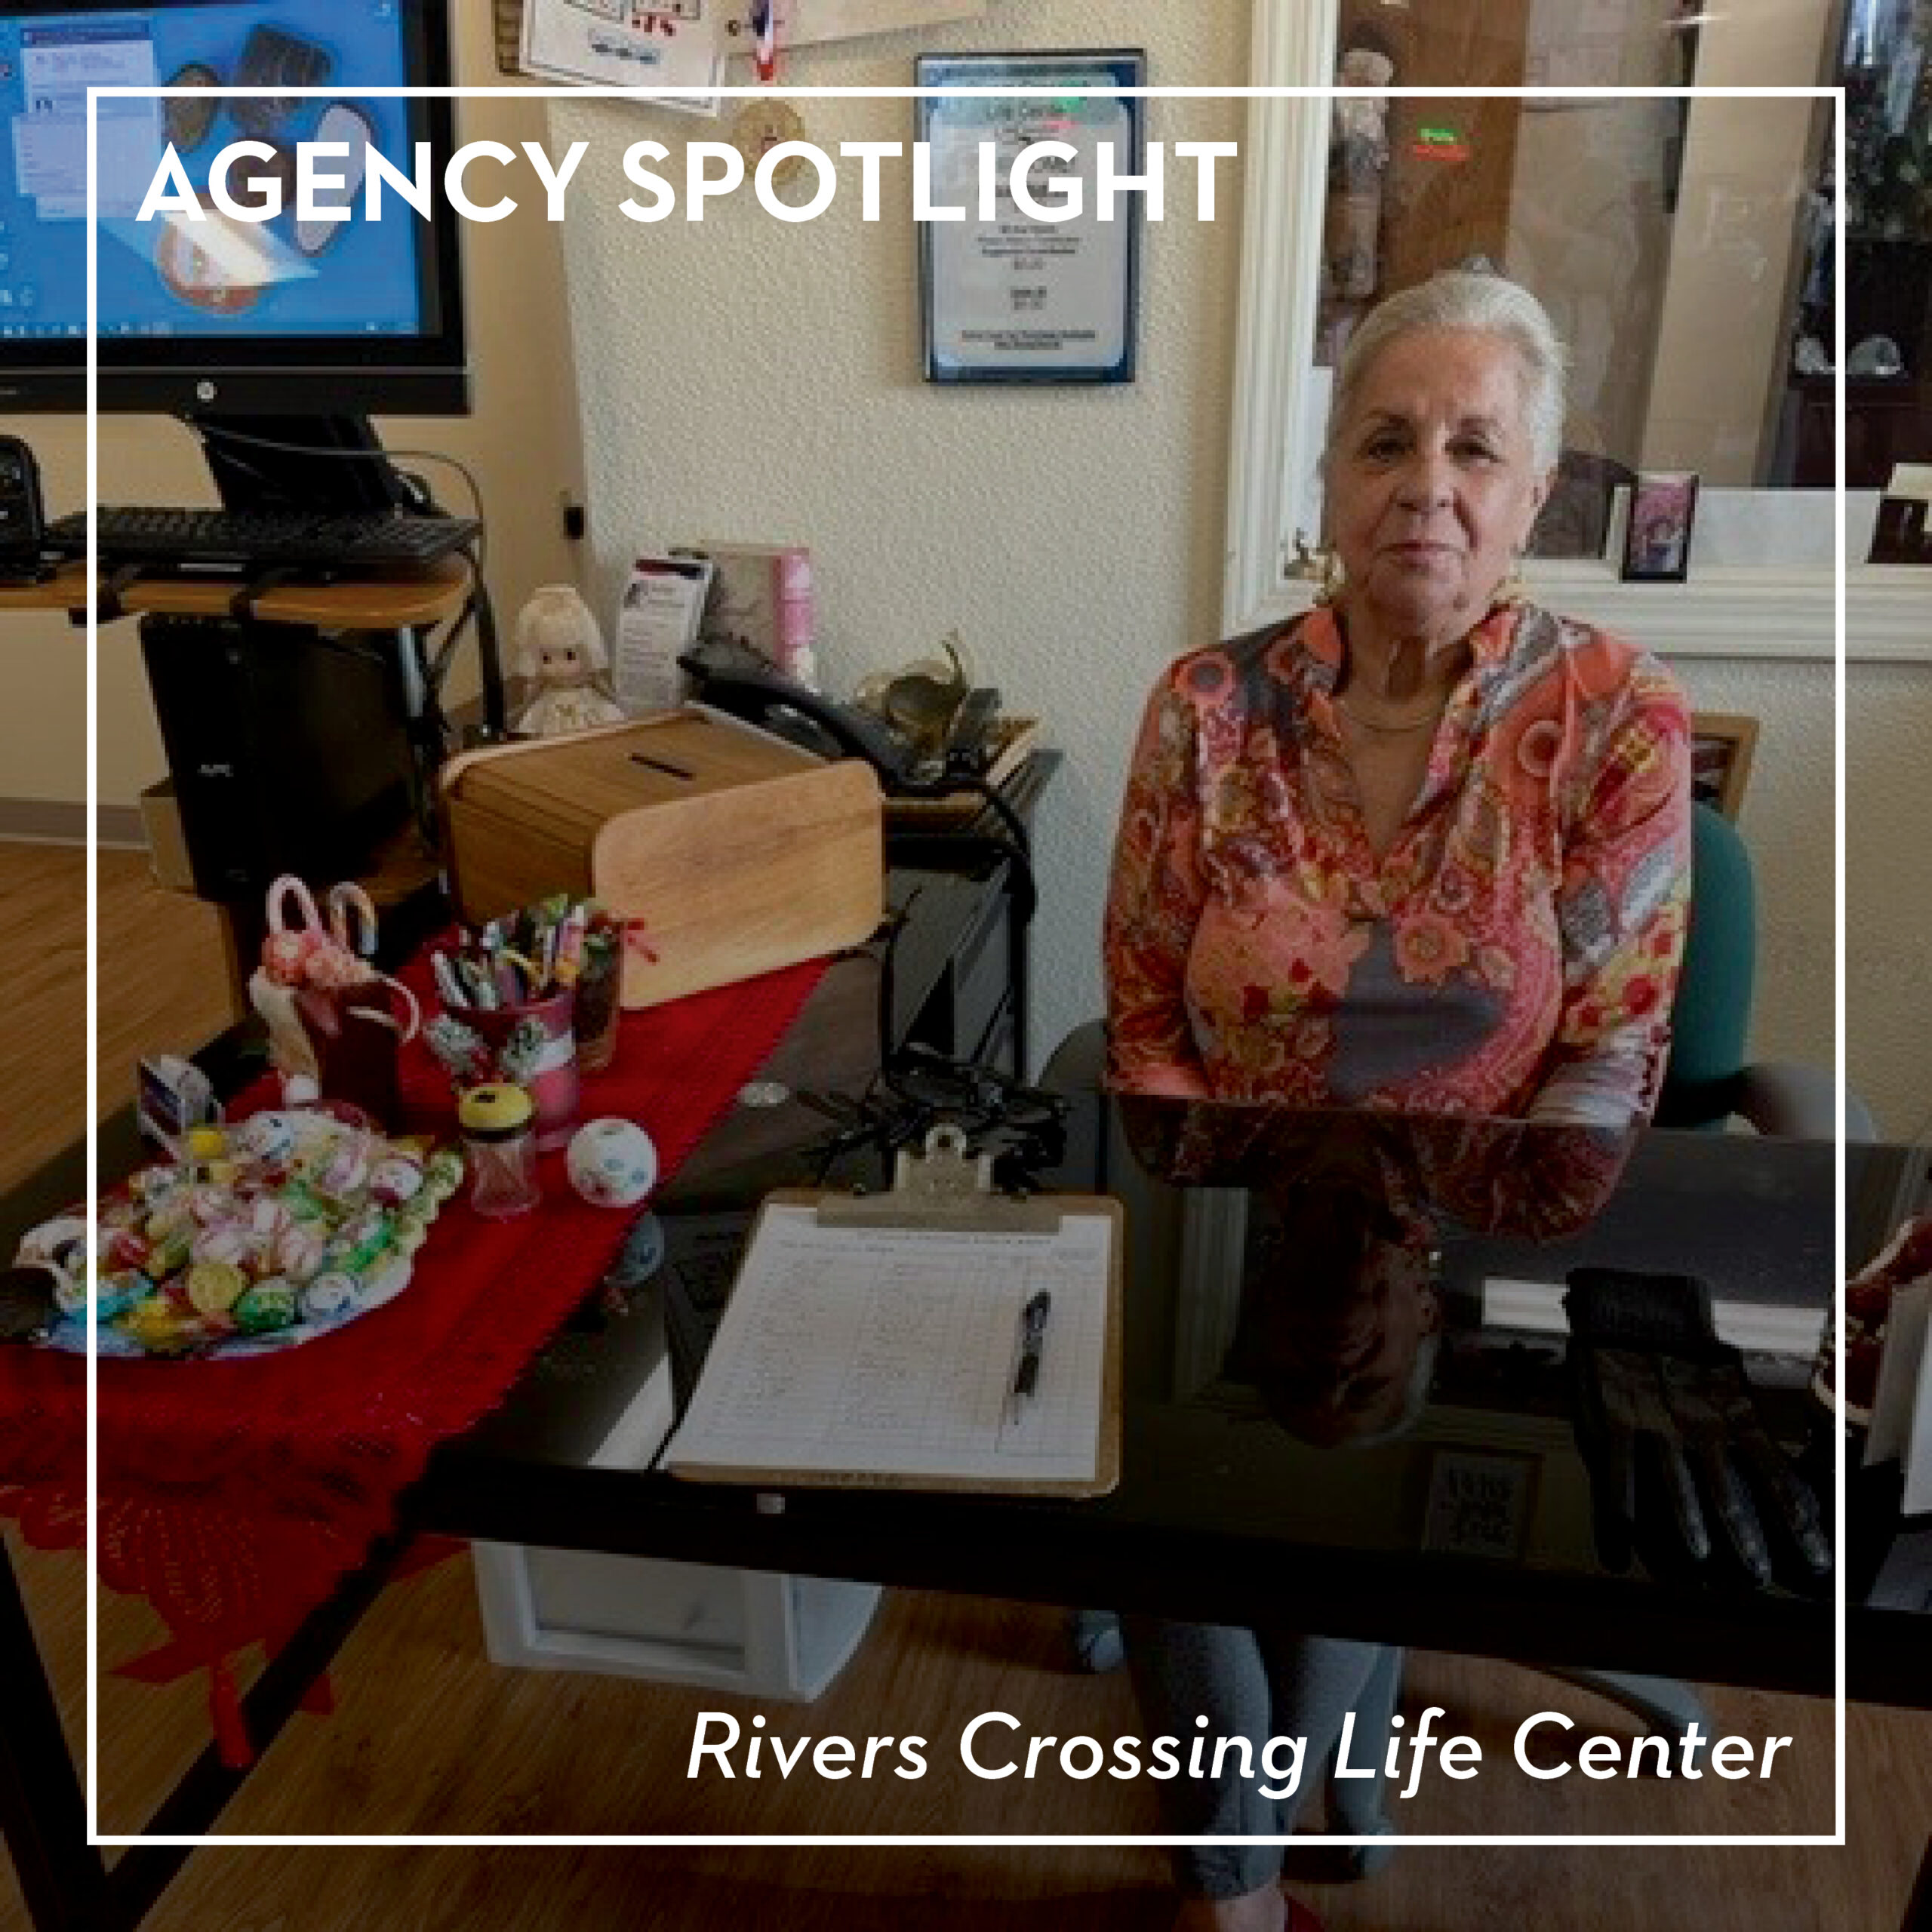 Rivers Crossing Life Center: A One-Stop Shop for Nutrition and Hope